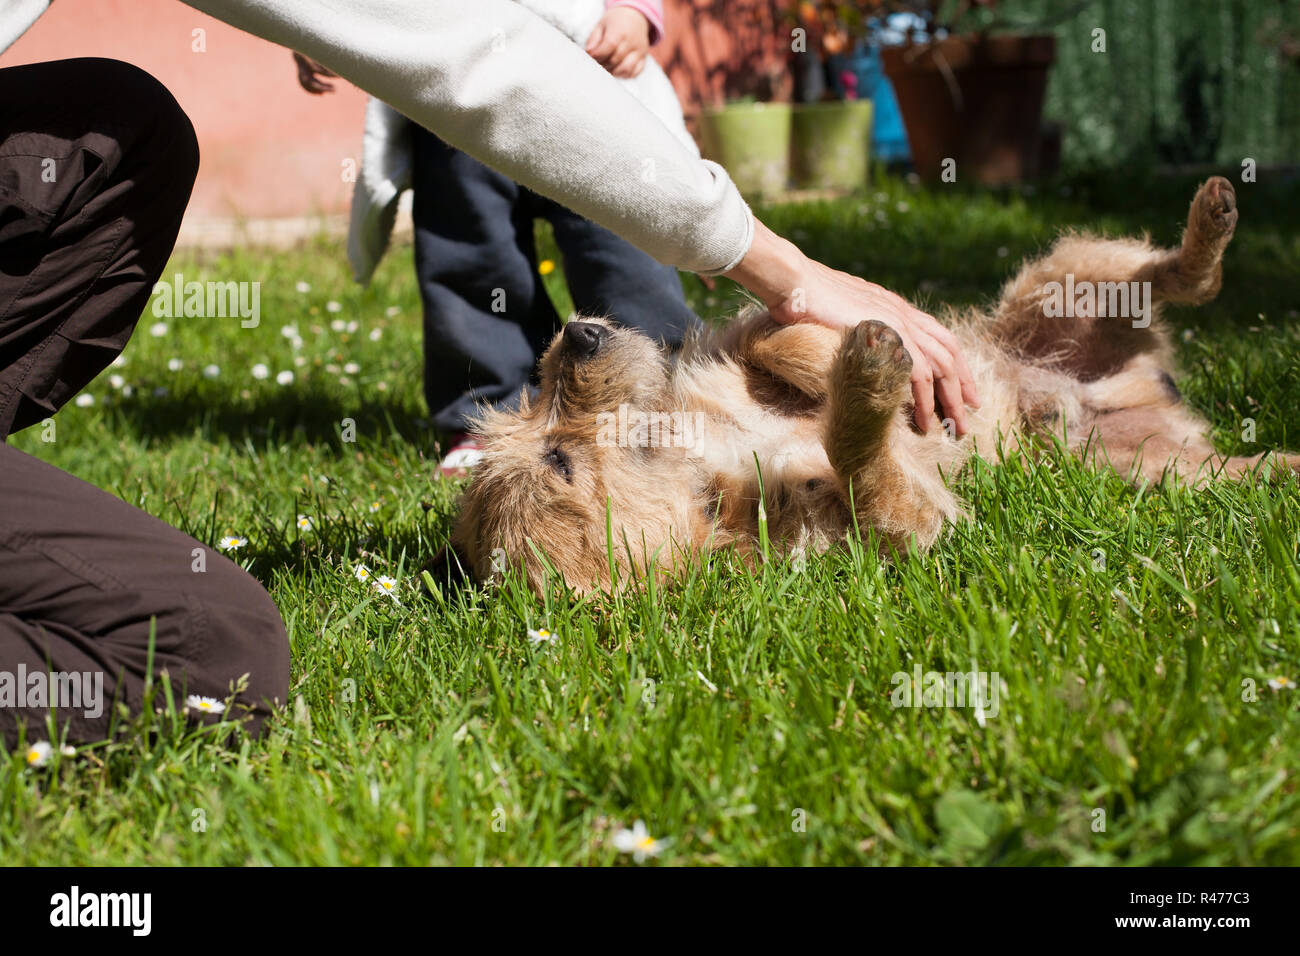 Donna hand baby petting cane Foto Stock